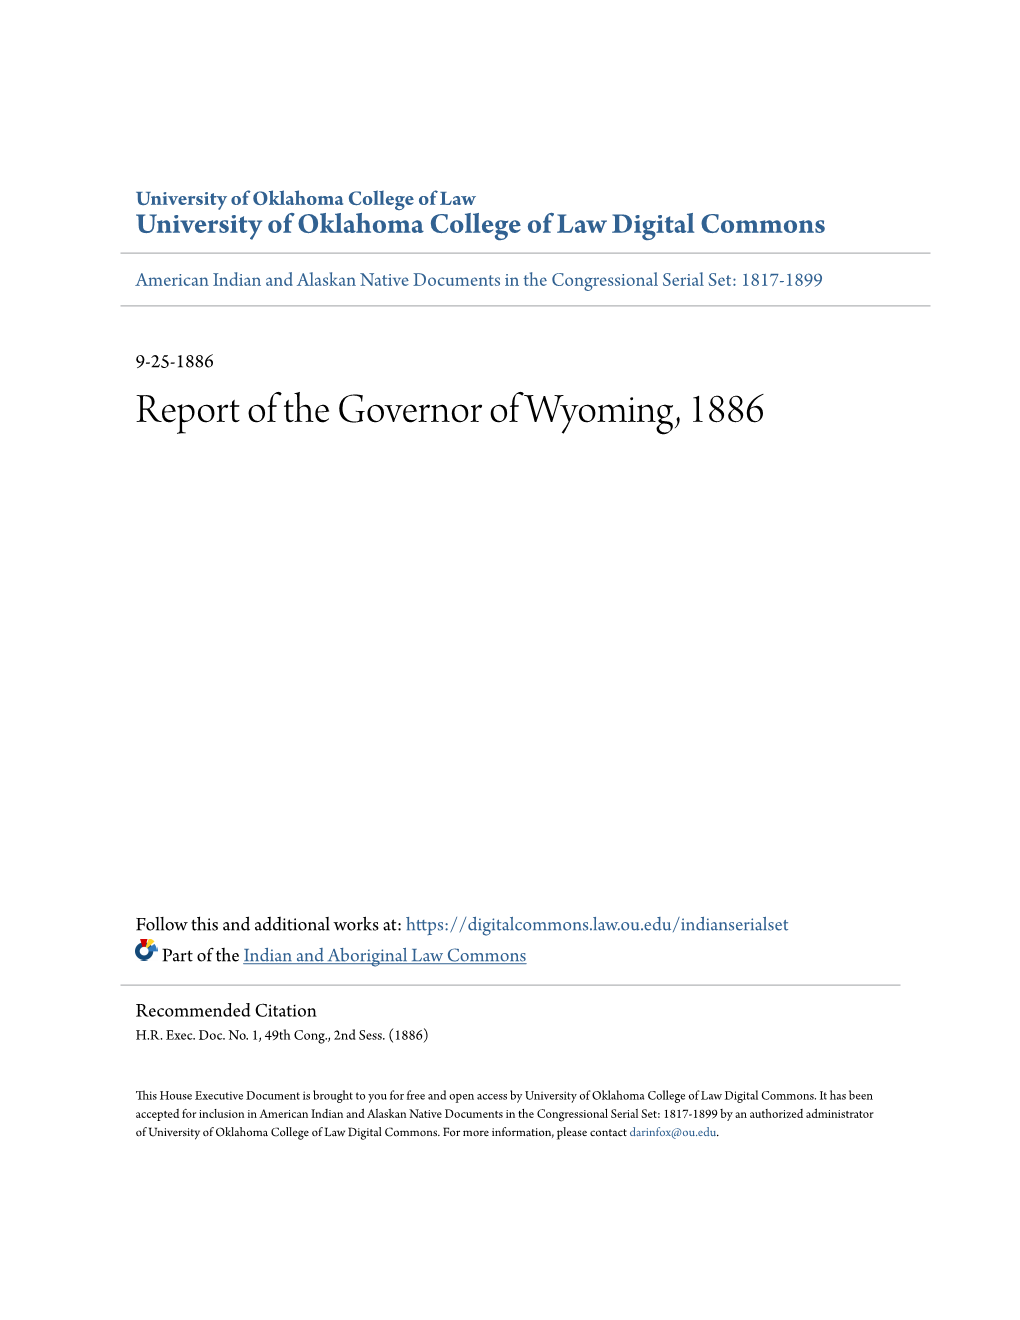 Report of the Governor of Wyoming, 1886